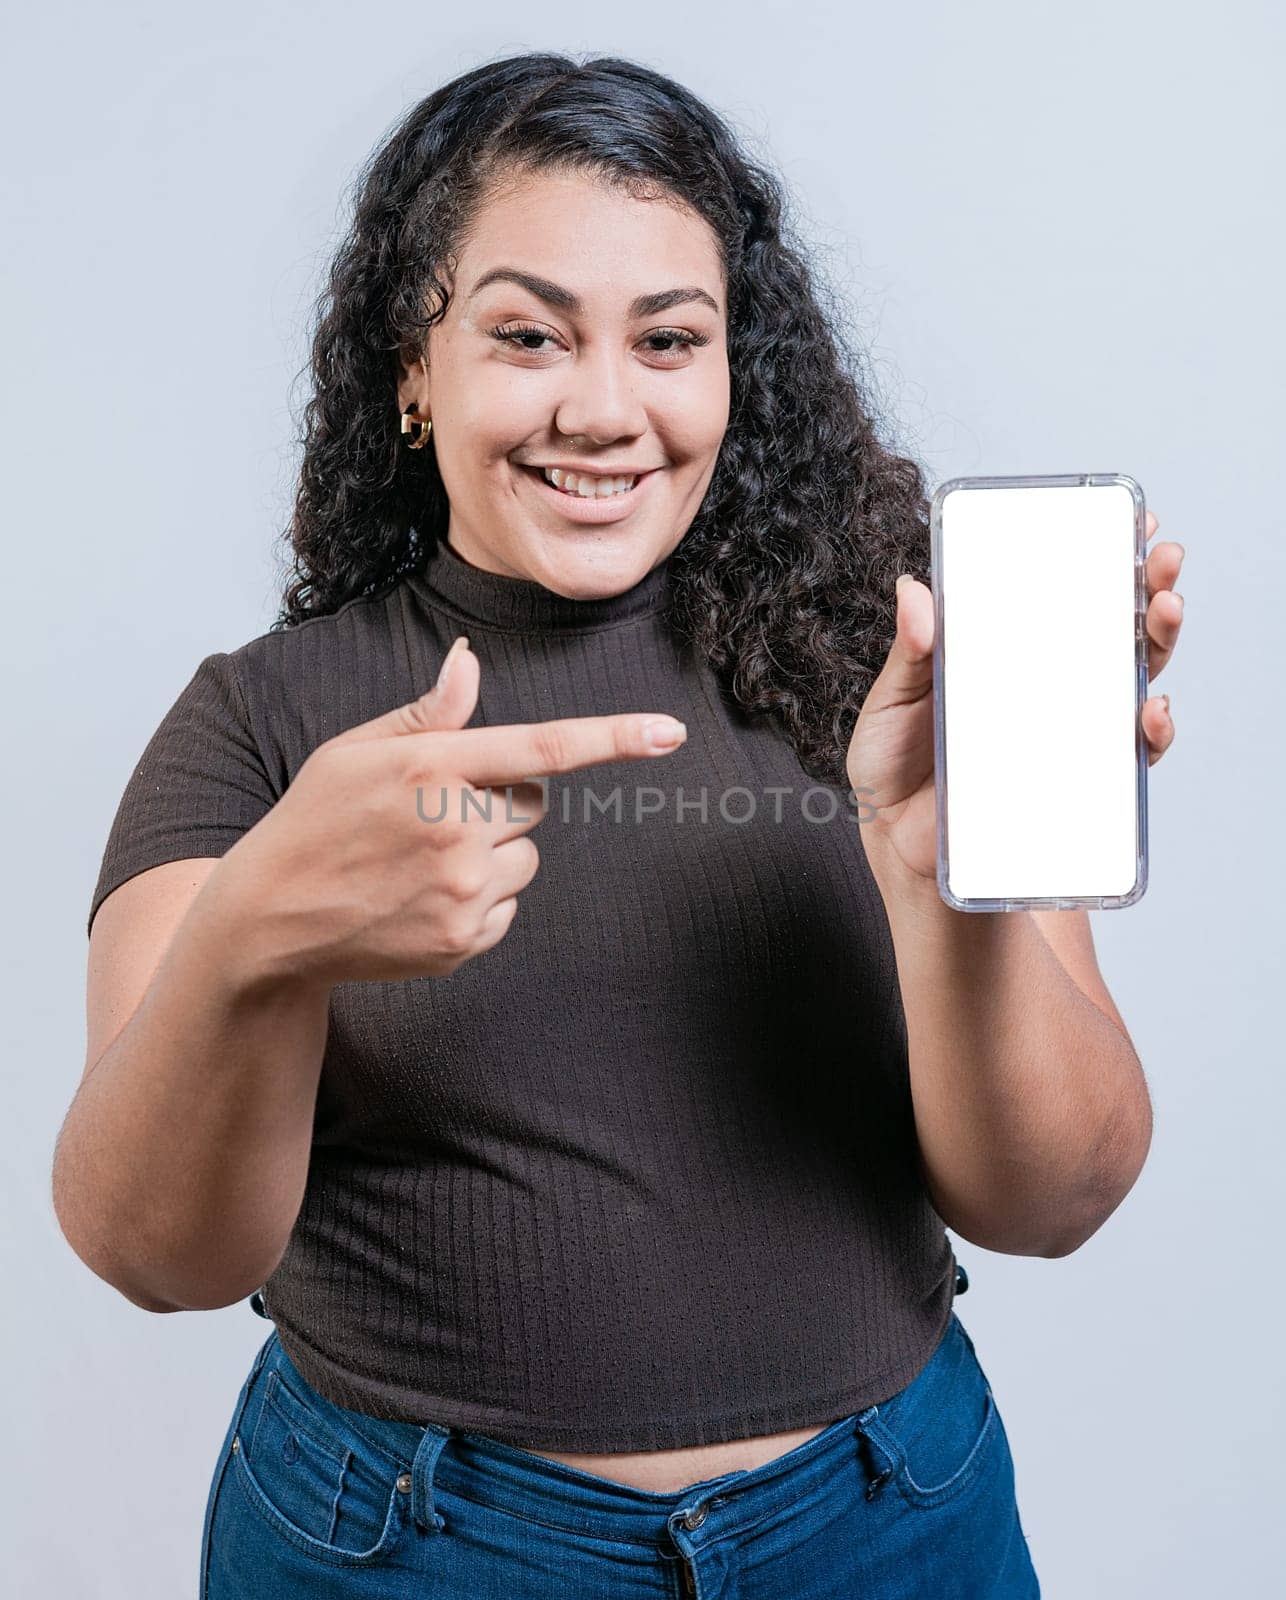 Smiling latin girl showing and pointing at cell phone screen isolated. Funny girl with curly hair showing an advertisement on her cell phone by isaiphoto